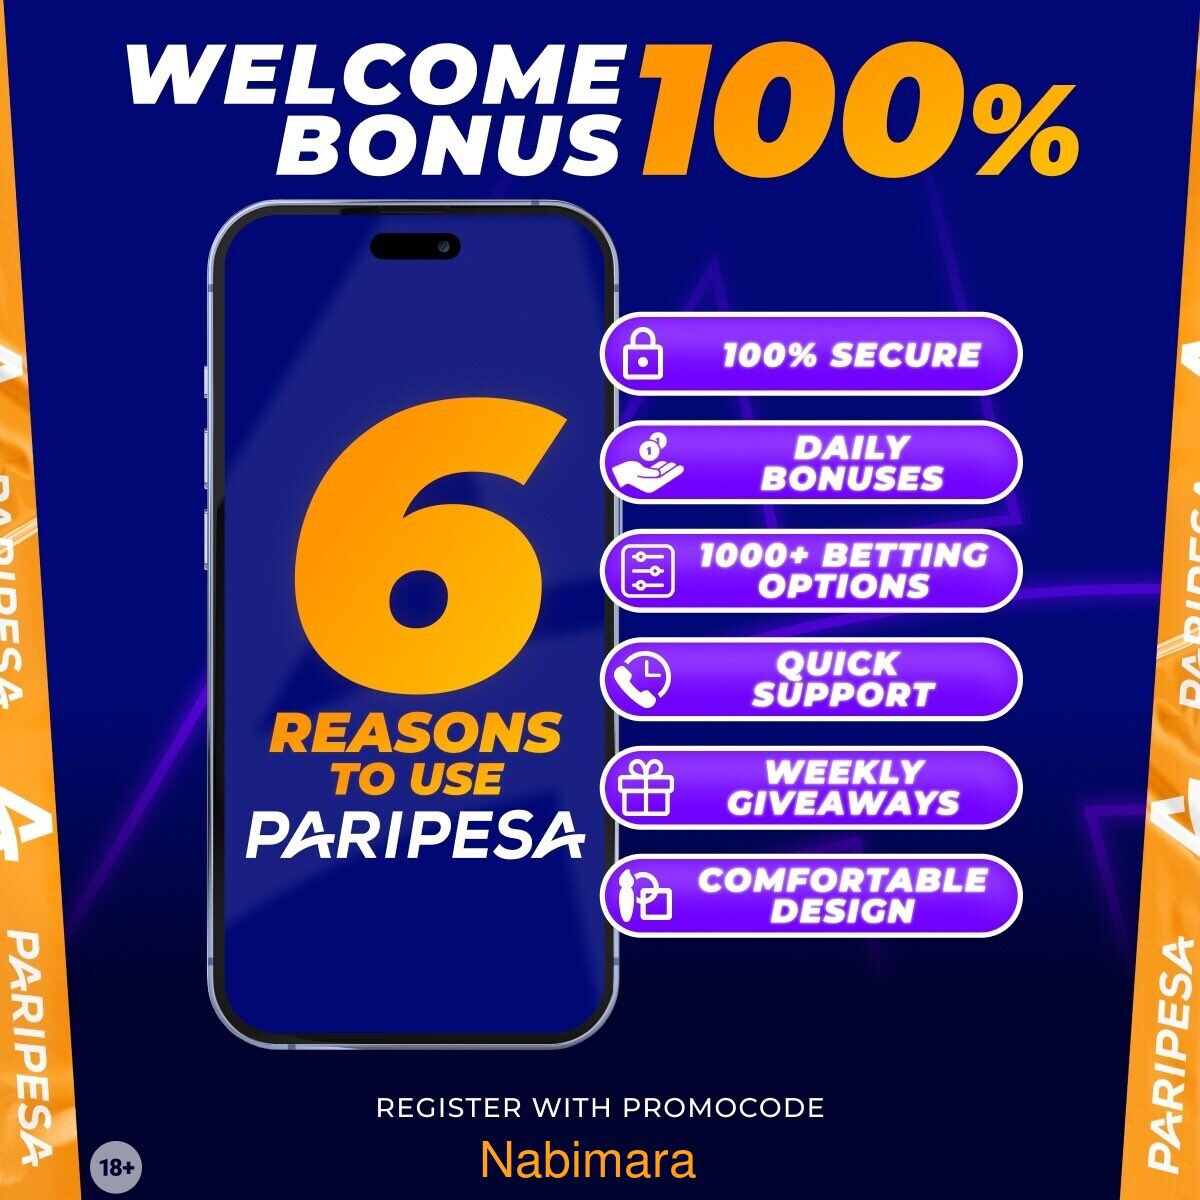 6 reasons why you should sign up for paripesa.🔥🔥 Register here 👉rb.gy/2x51bw and use “Nabimara” as promo code.